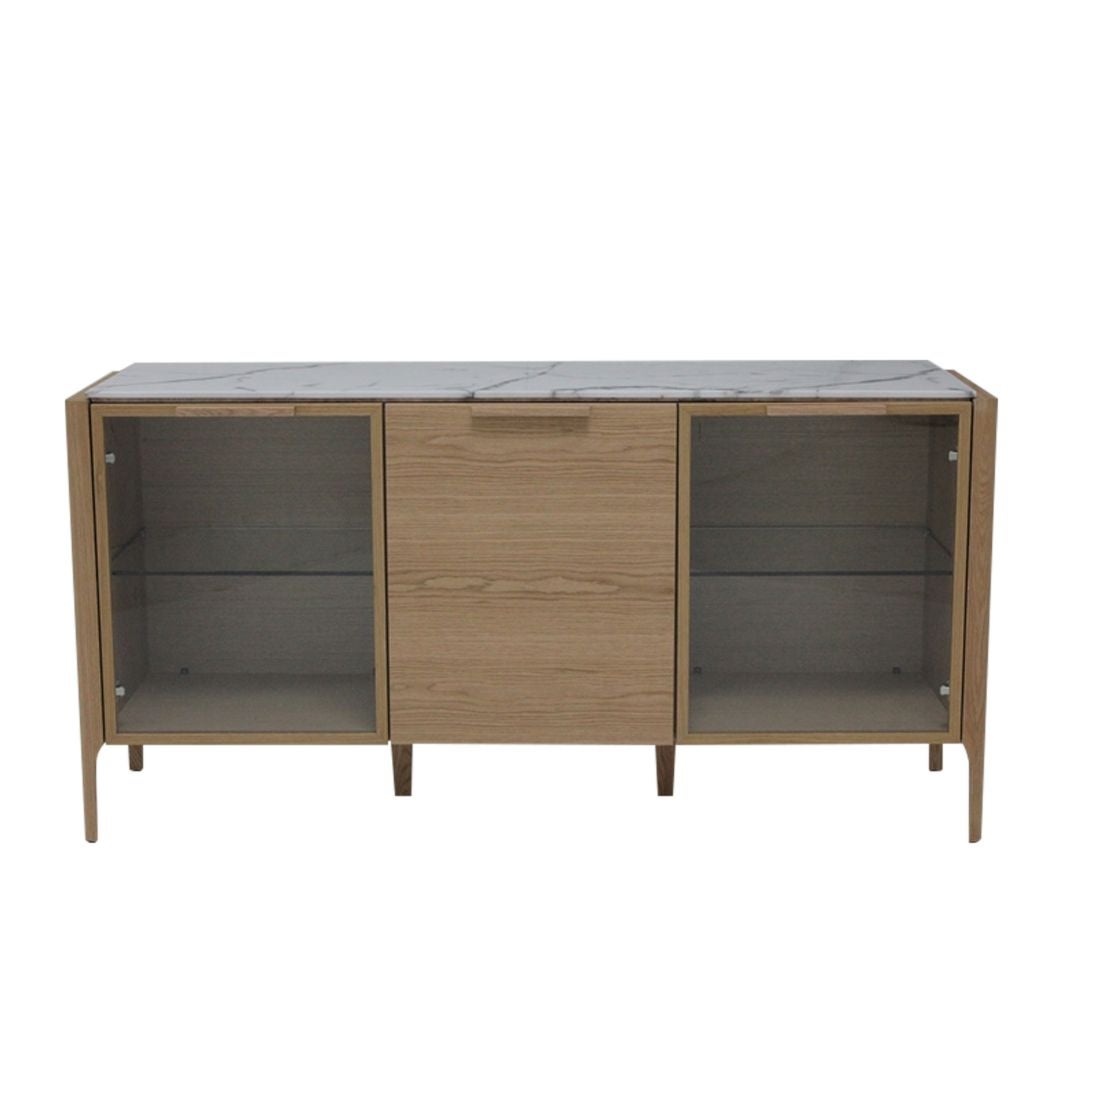 19203166-winshi-furniture-living-room-console-01